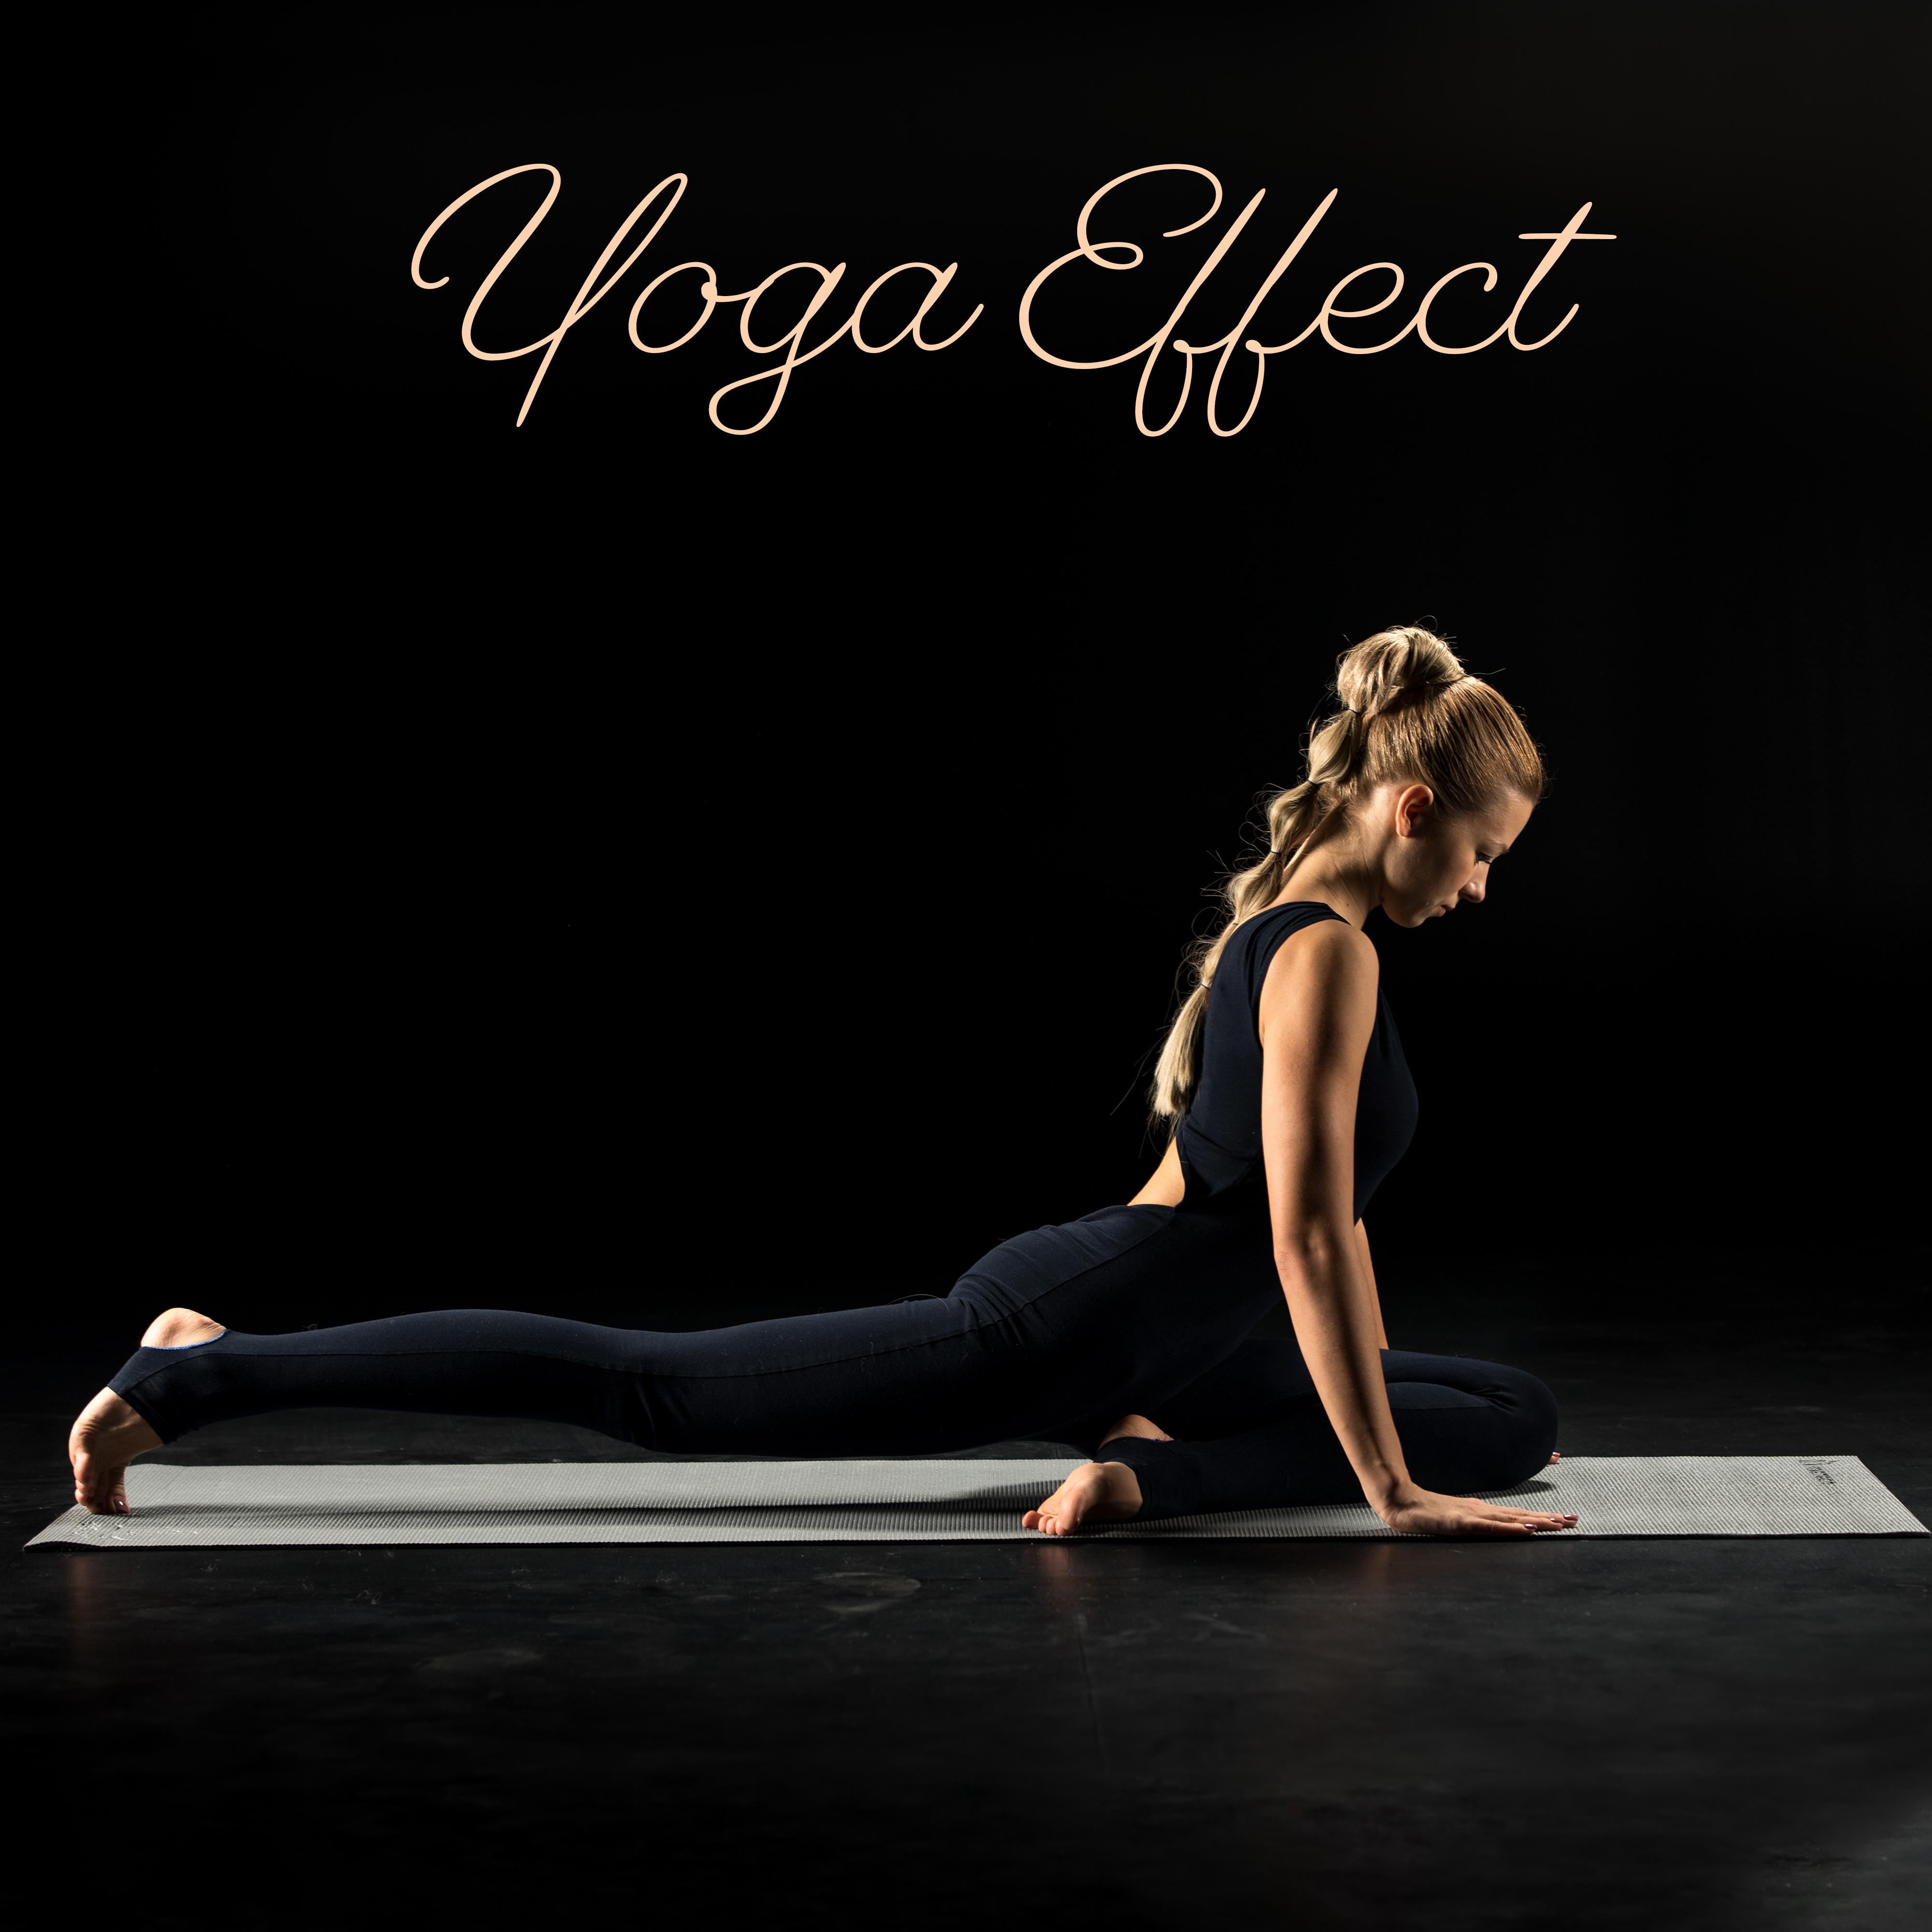 Yoga Effect: Music for Treatment and Therapy, Relief in Ailments, Relieving Stress, Soothing Nerves and Tension, Cleansing and Unblocking the Chakras